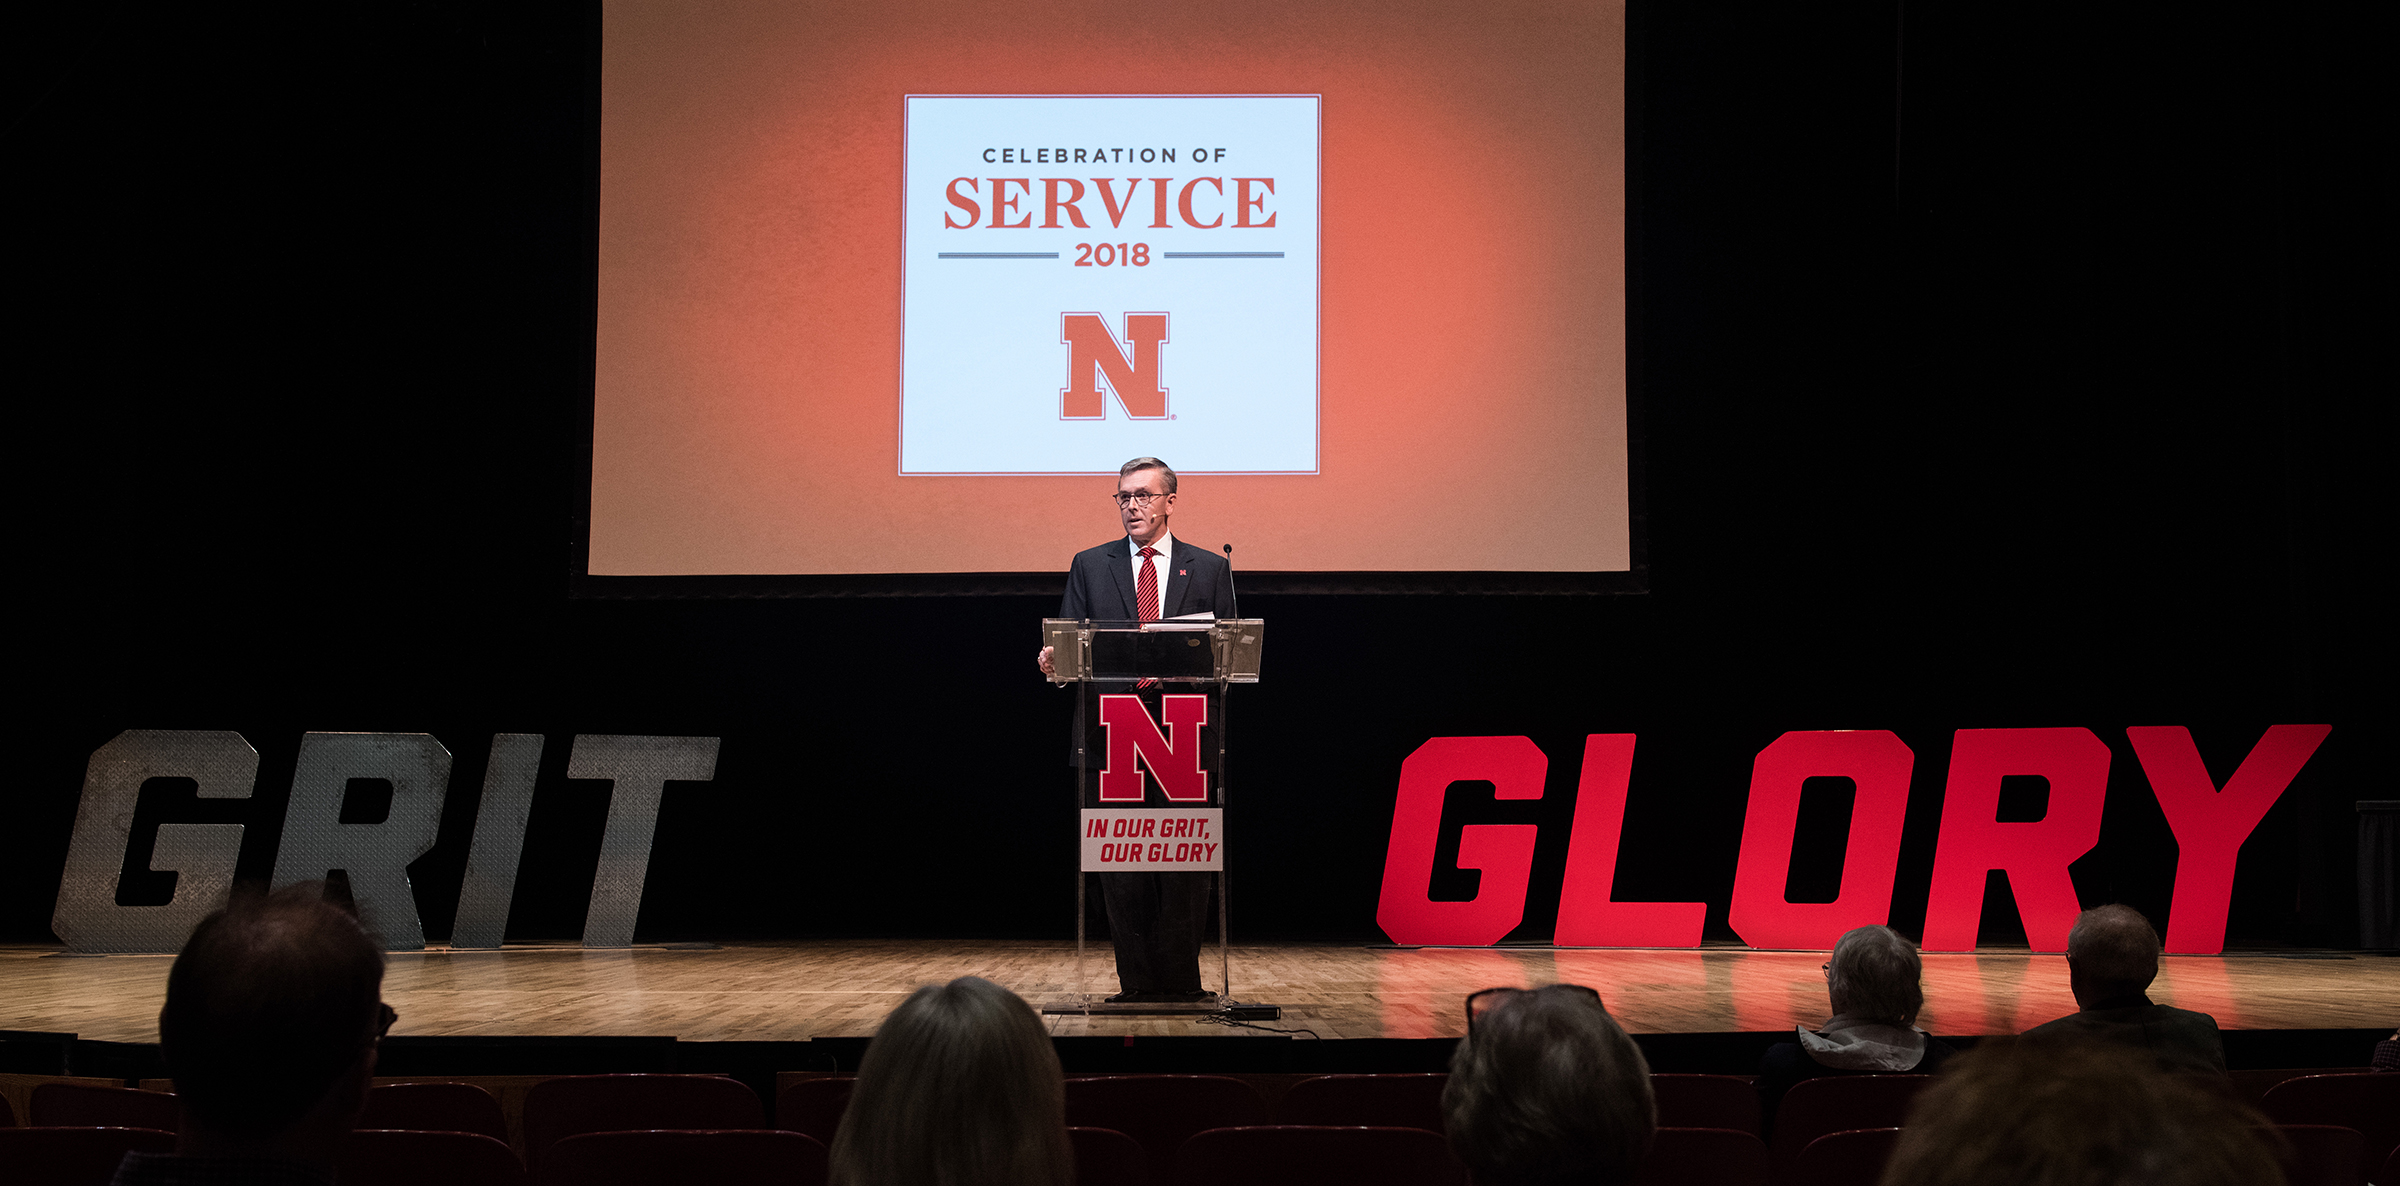 Chancellor Ronnie Green addresses the nearly 300 faculty and staff who attended the Celebration of Service in Kimball Recital Hall on Sept. 25.  |  Greg Nathan, University Communication